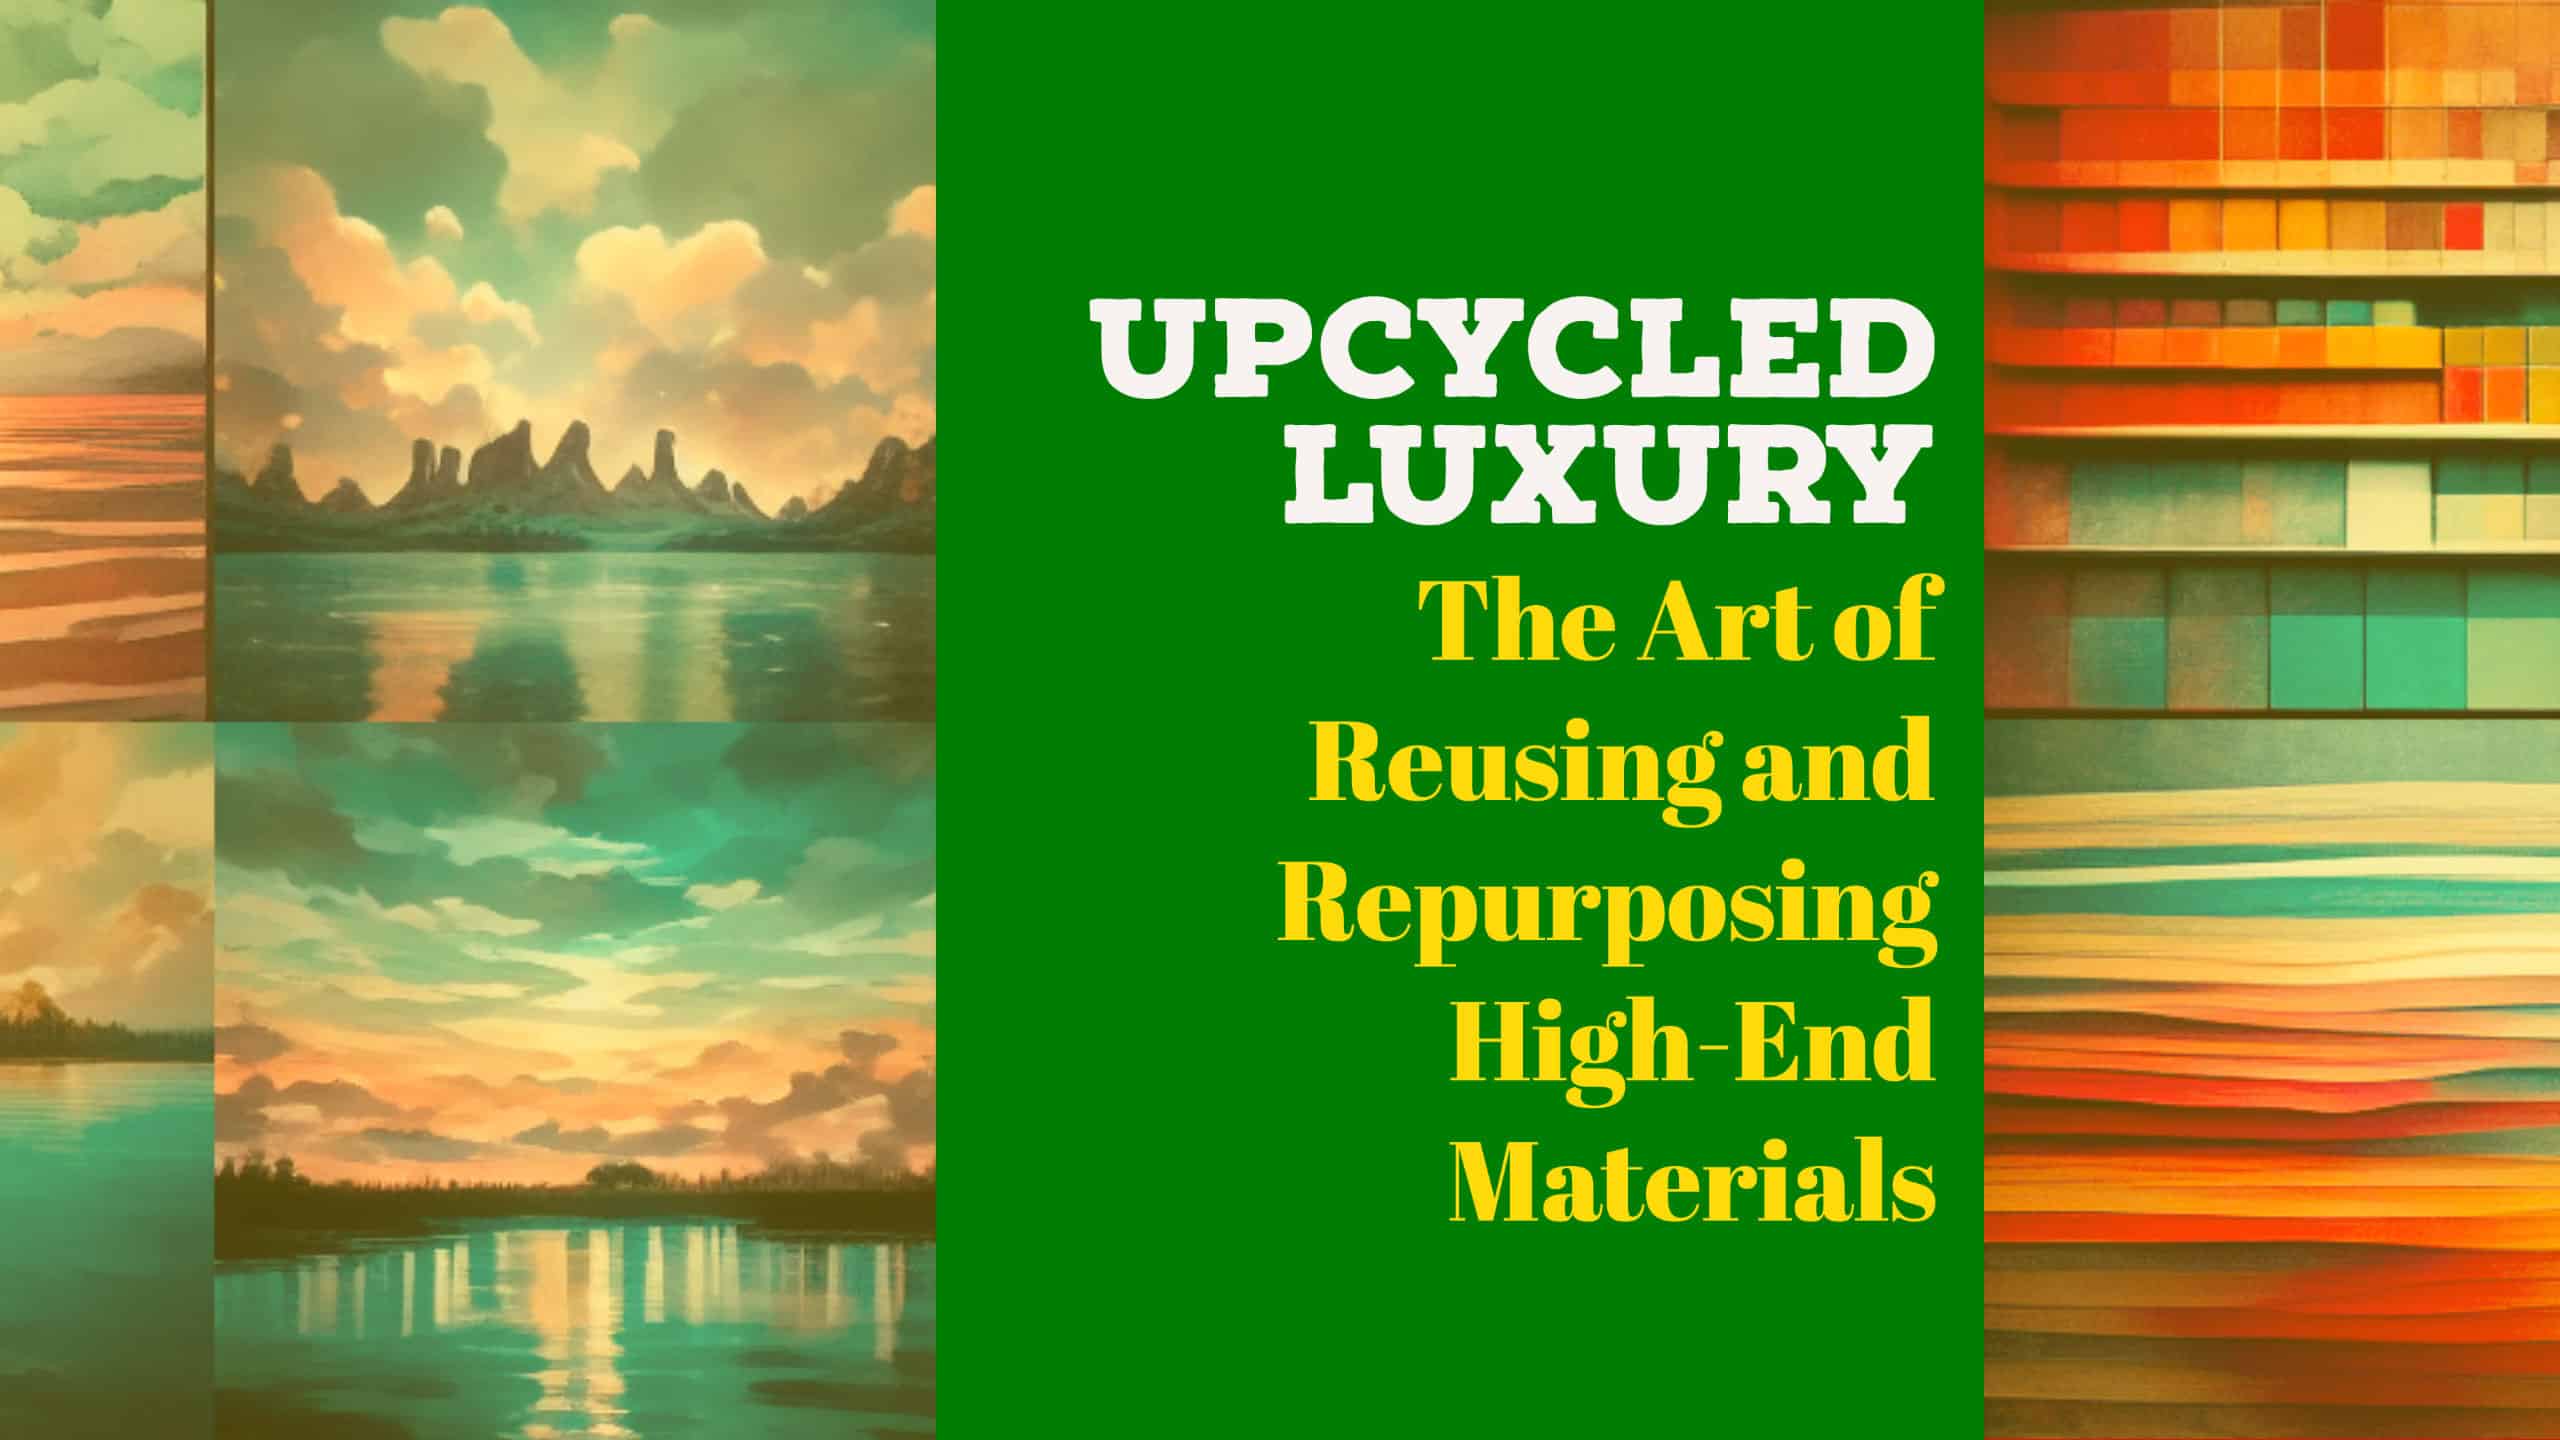 Upcycled Luxury: The Art of Reusing and Repurposing High-End Materials